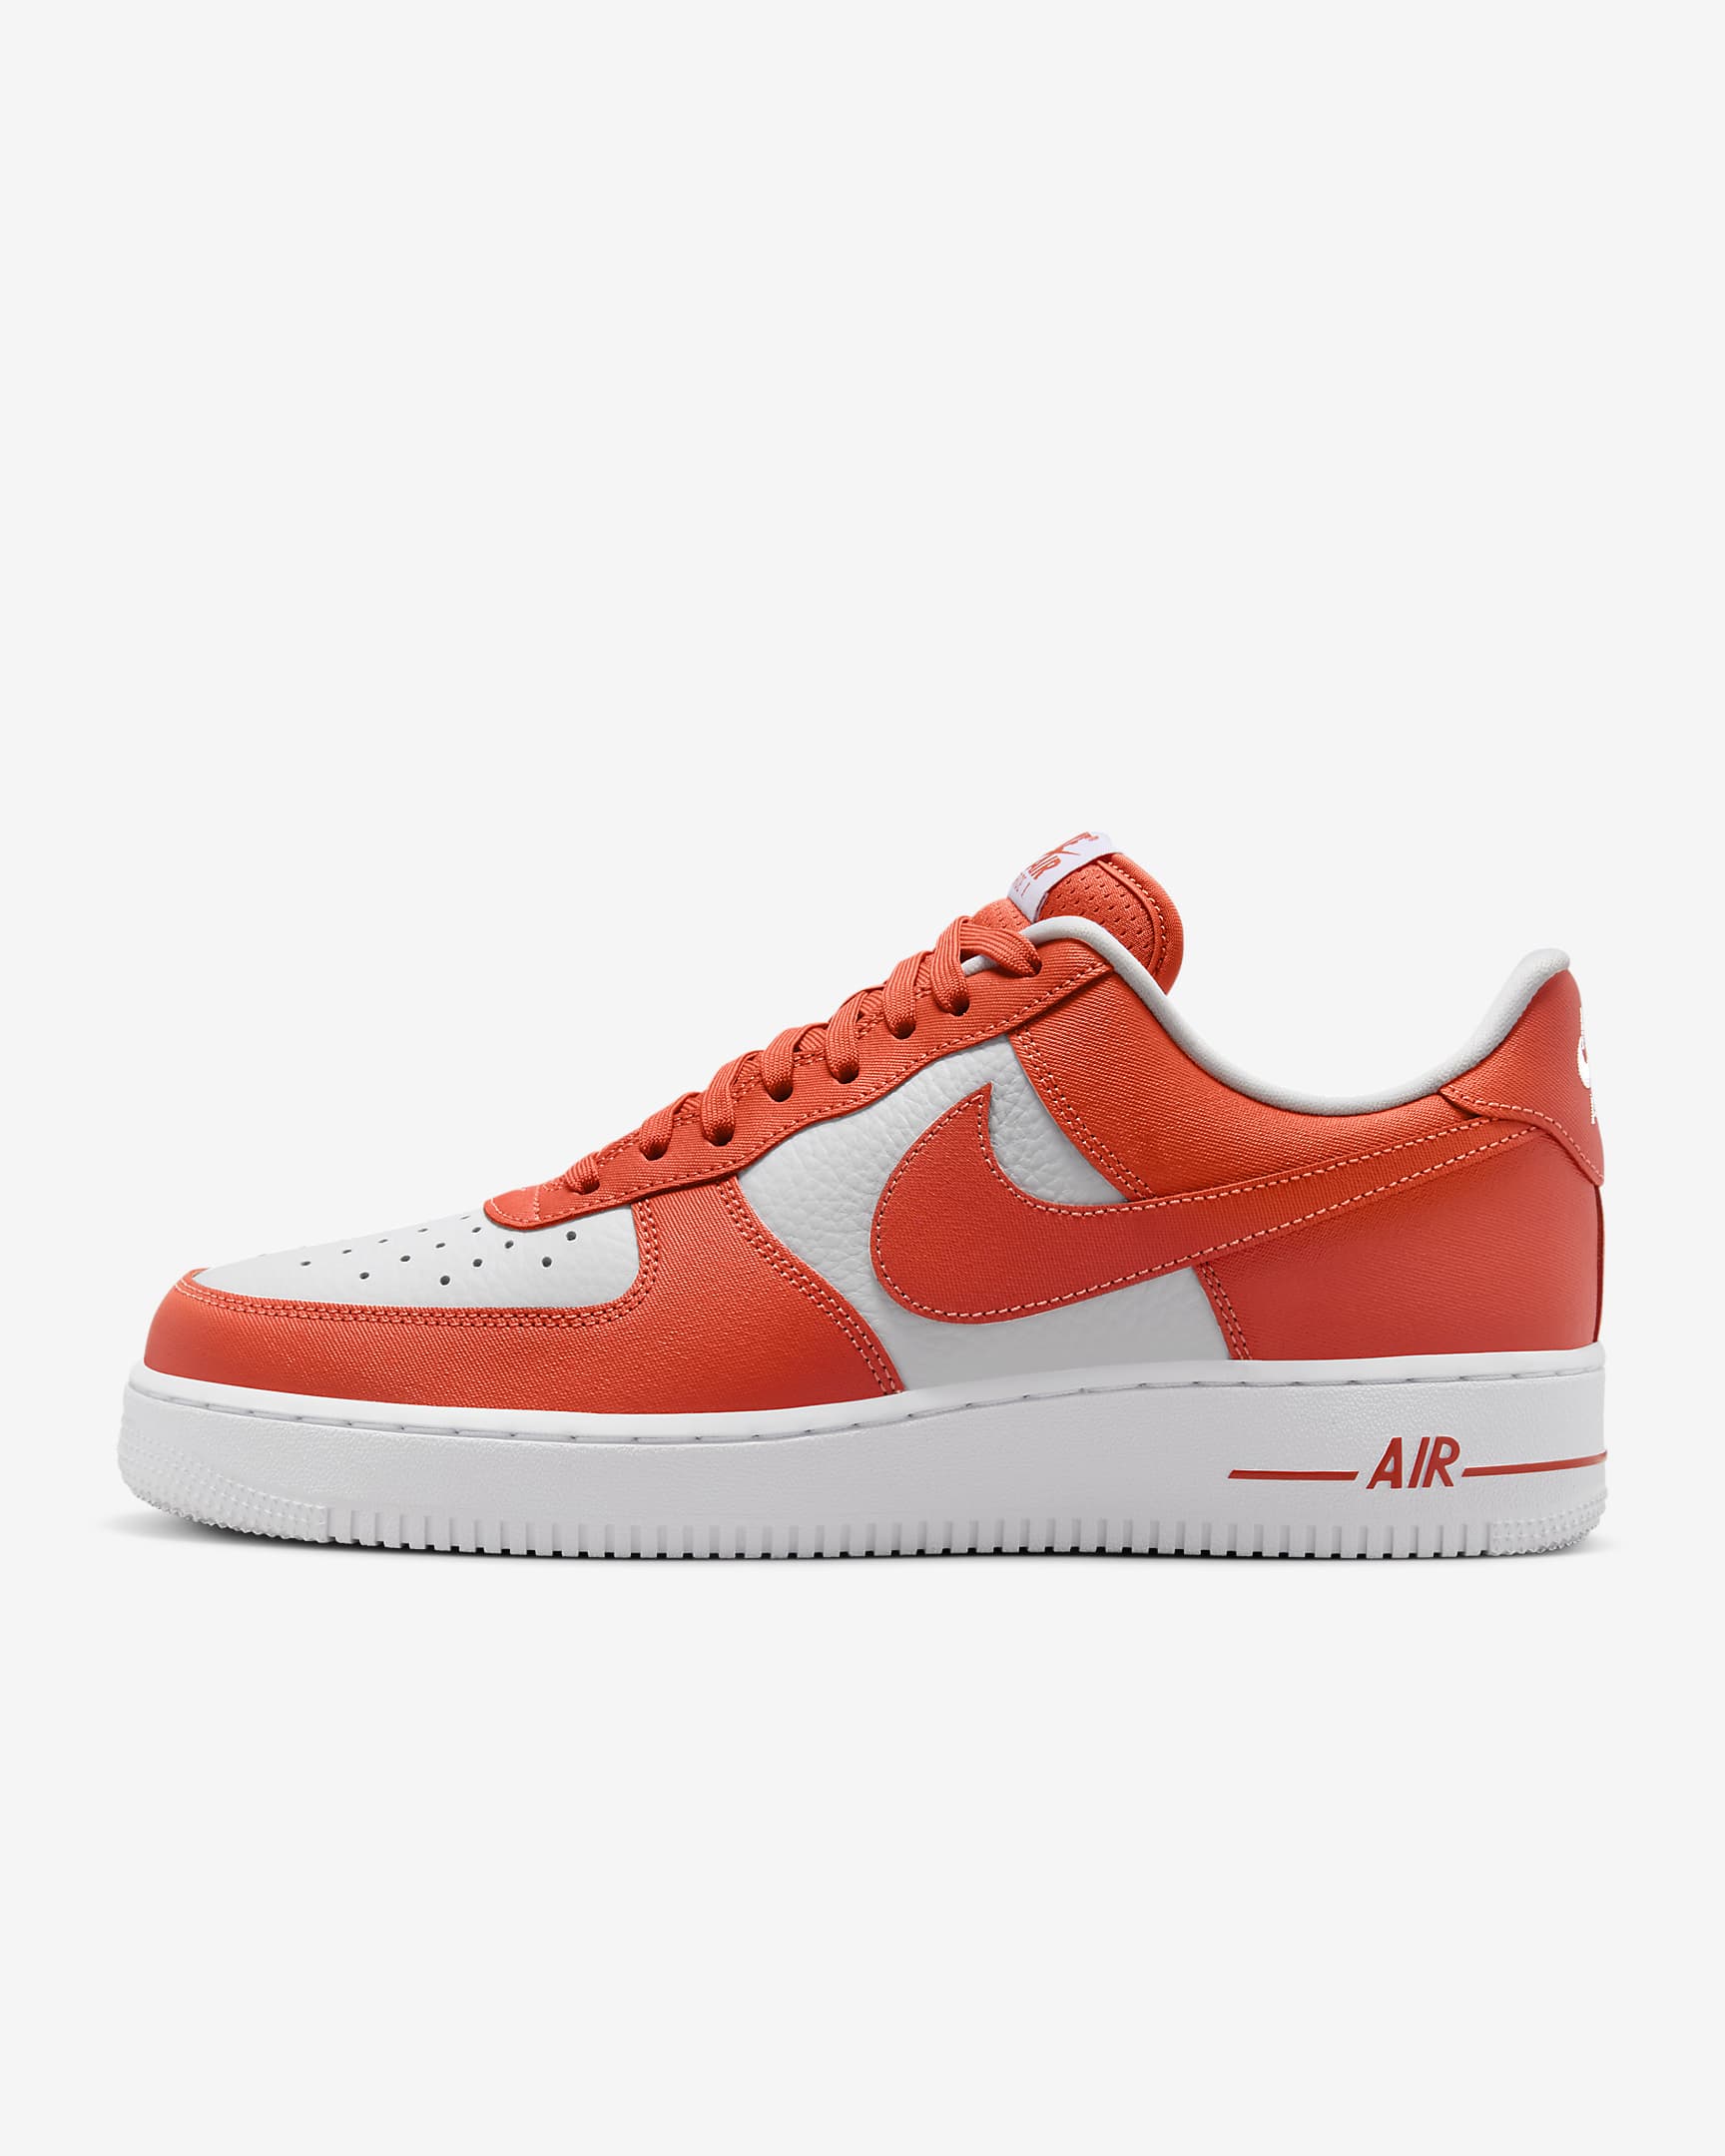 Nike Air Force 1 '07 Men's Shoes - Cosmic Clay/White